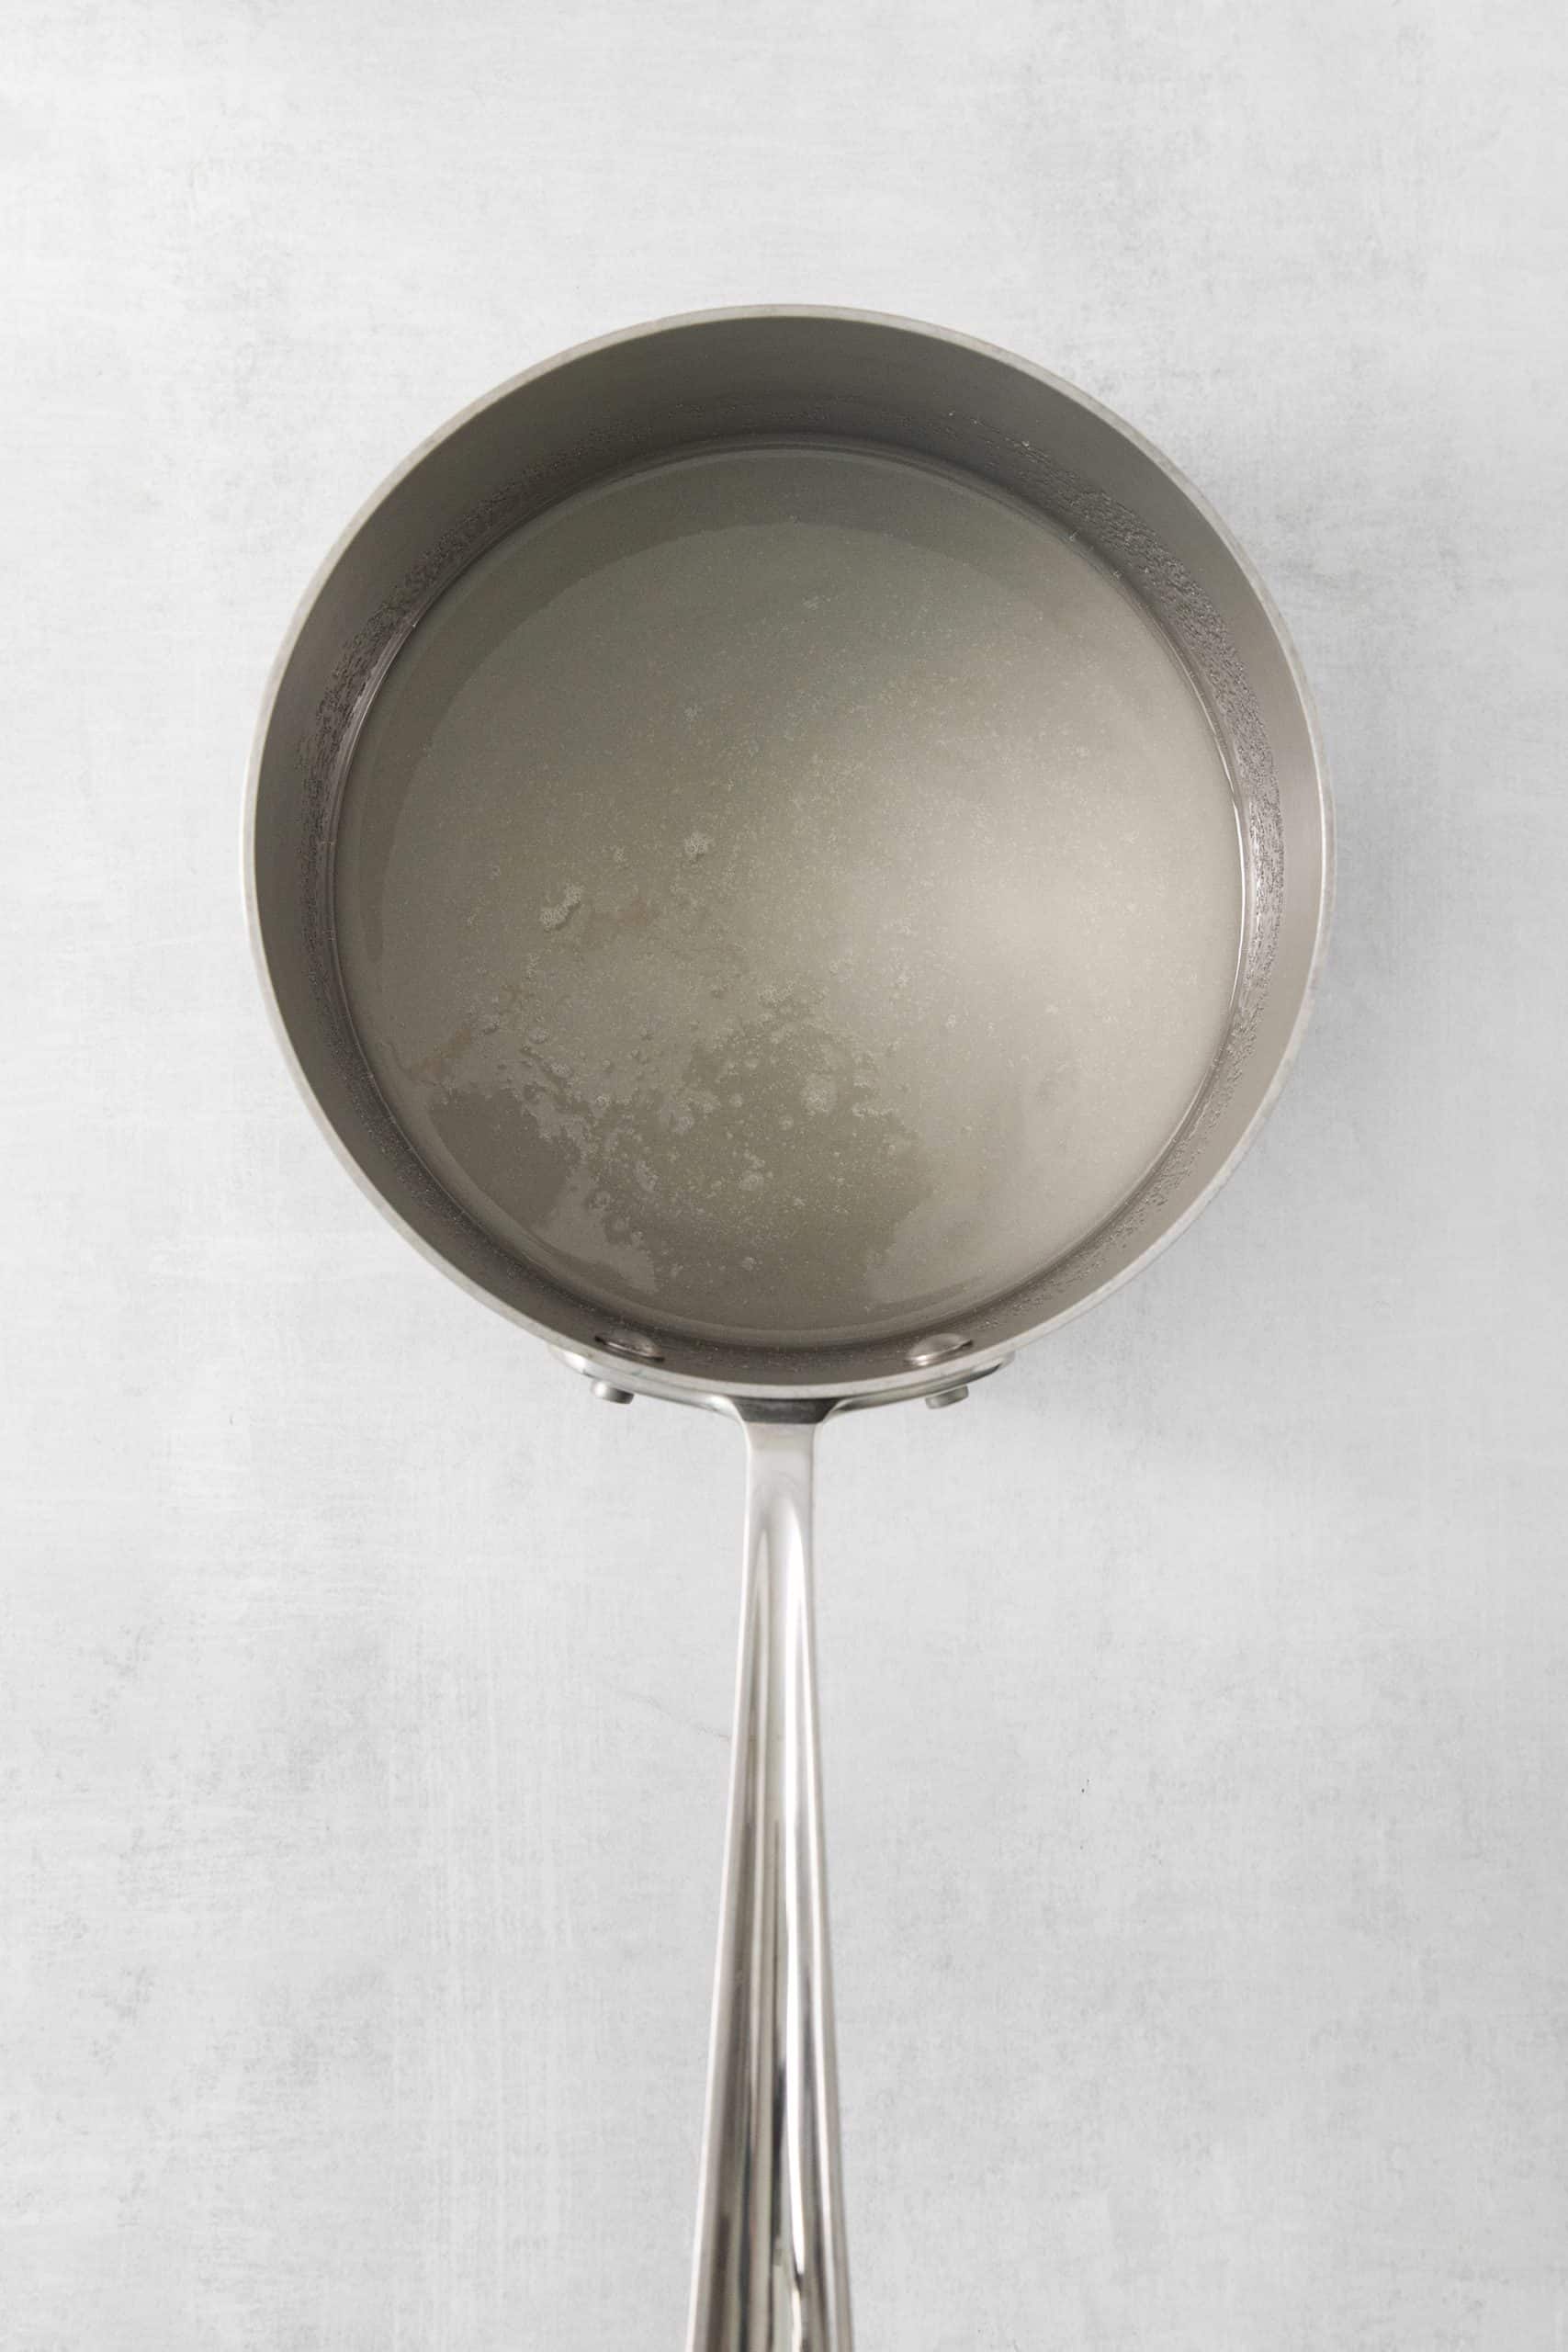 Sugar, corn syrup and water in a saucepan